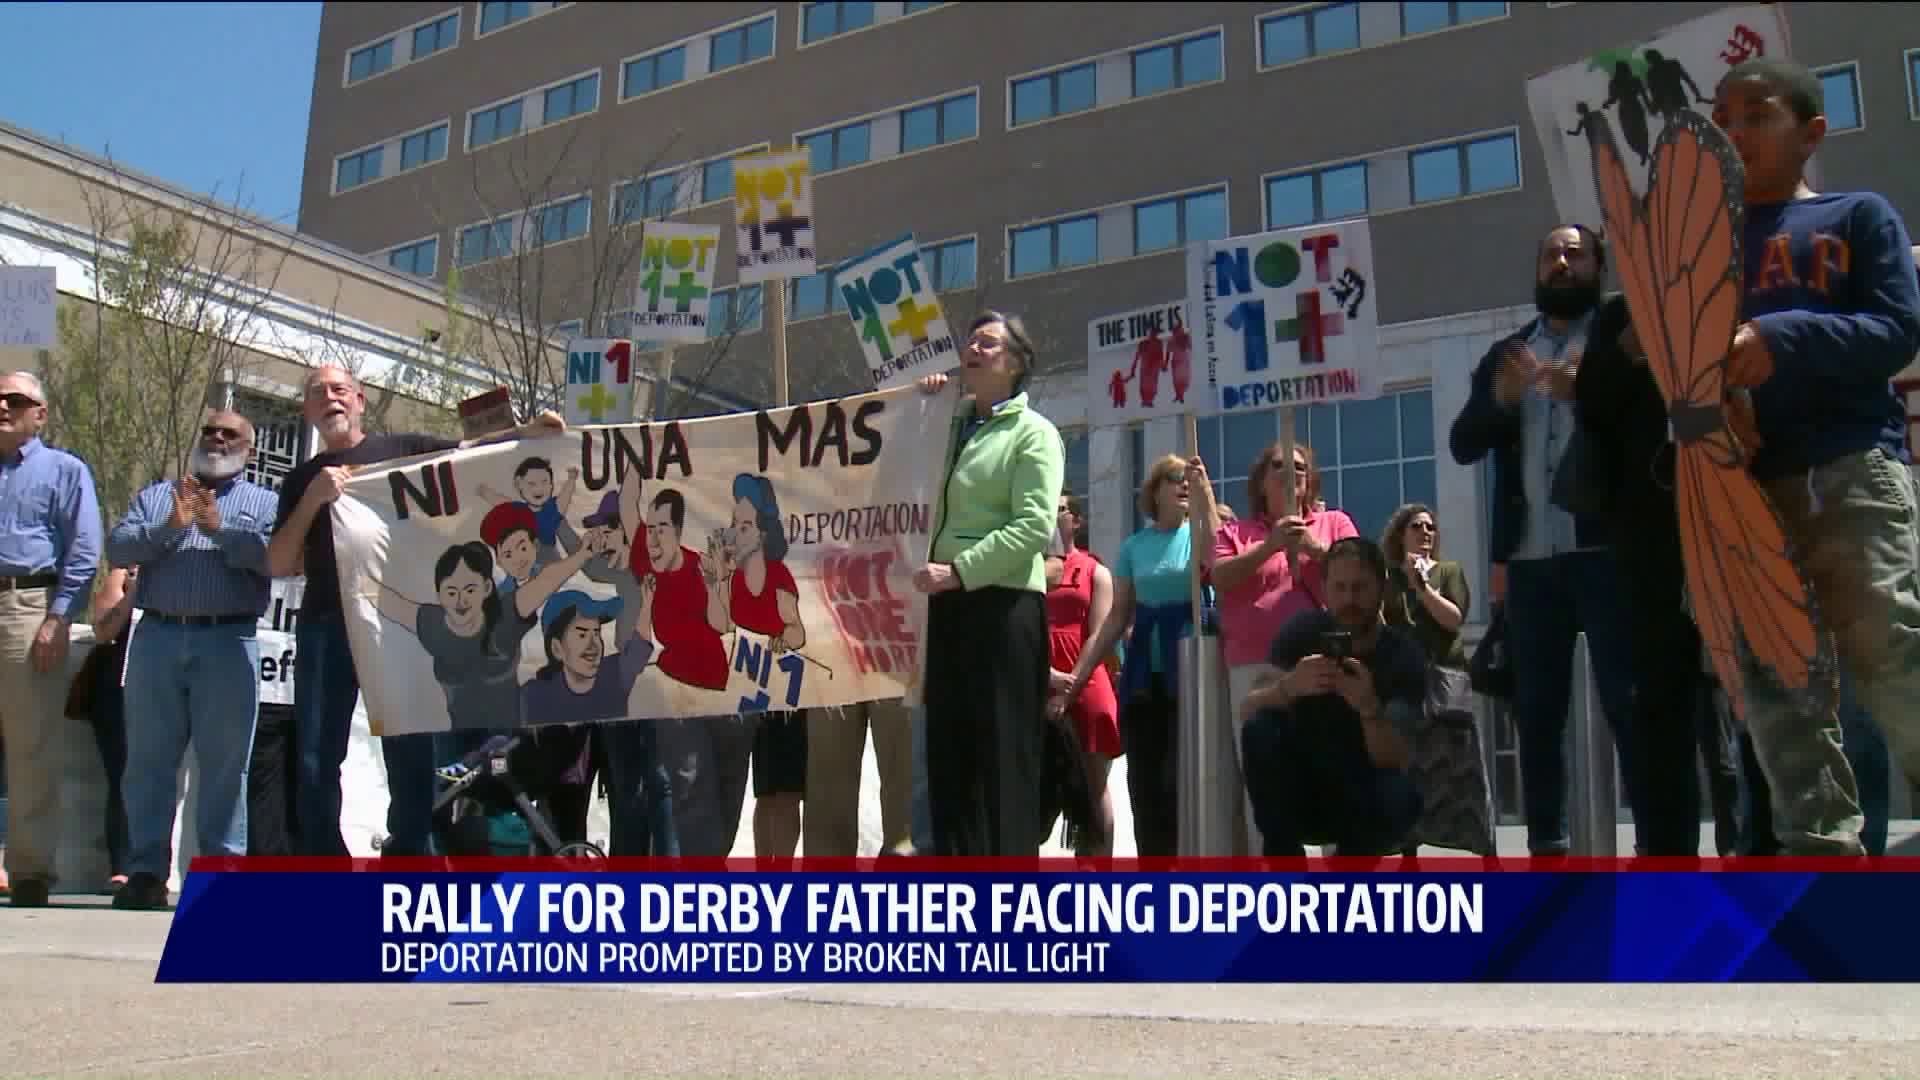 Rally for Derby father facing deportation prompted by broken tail light